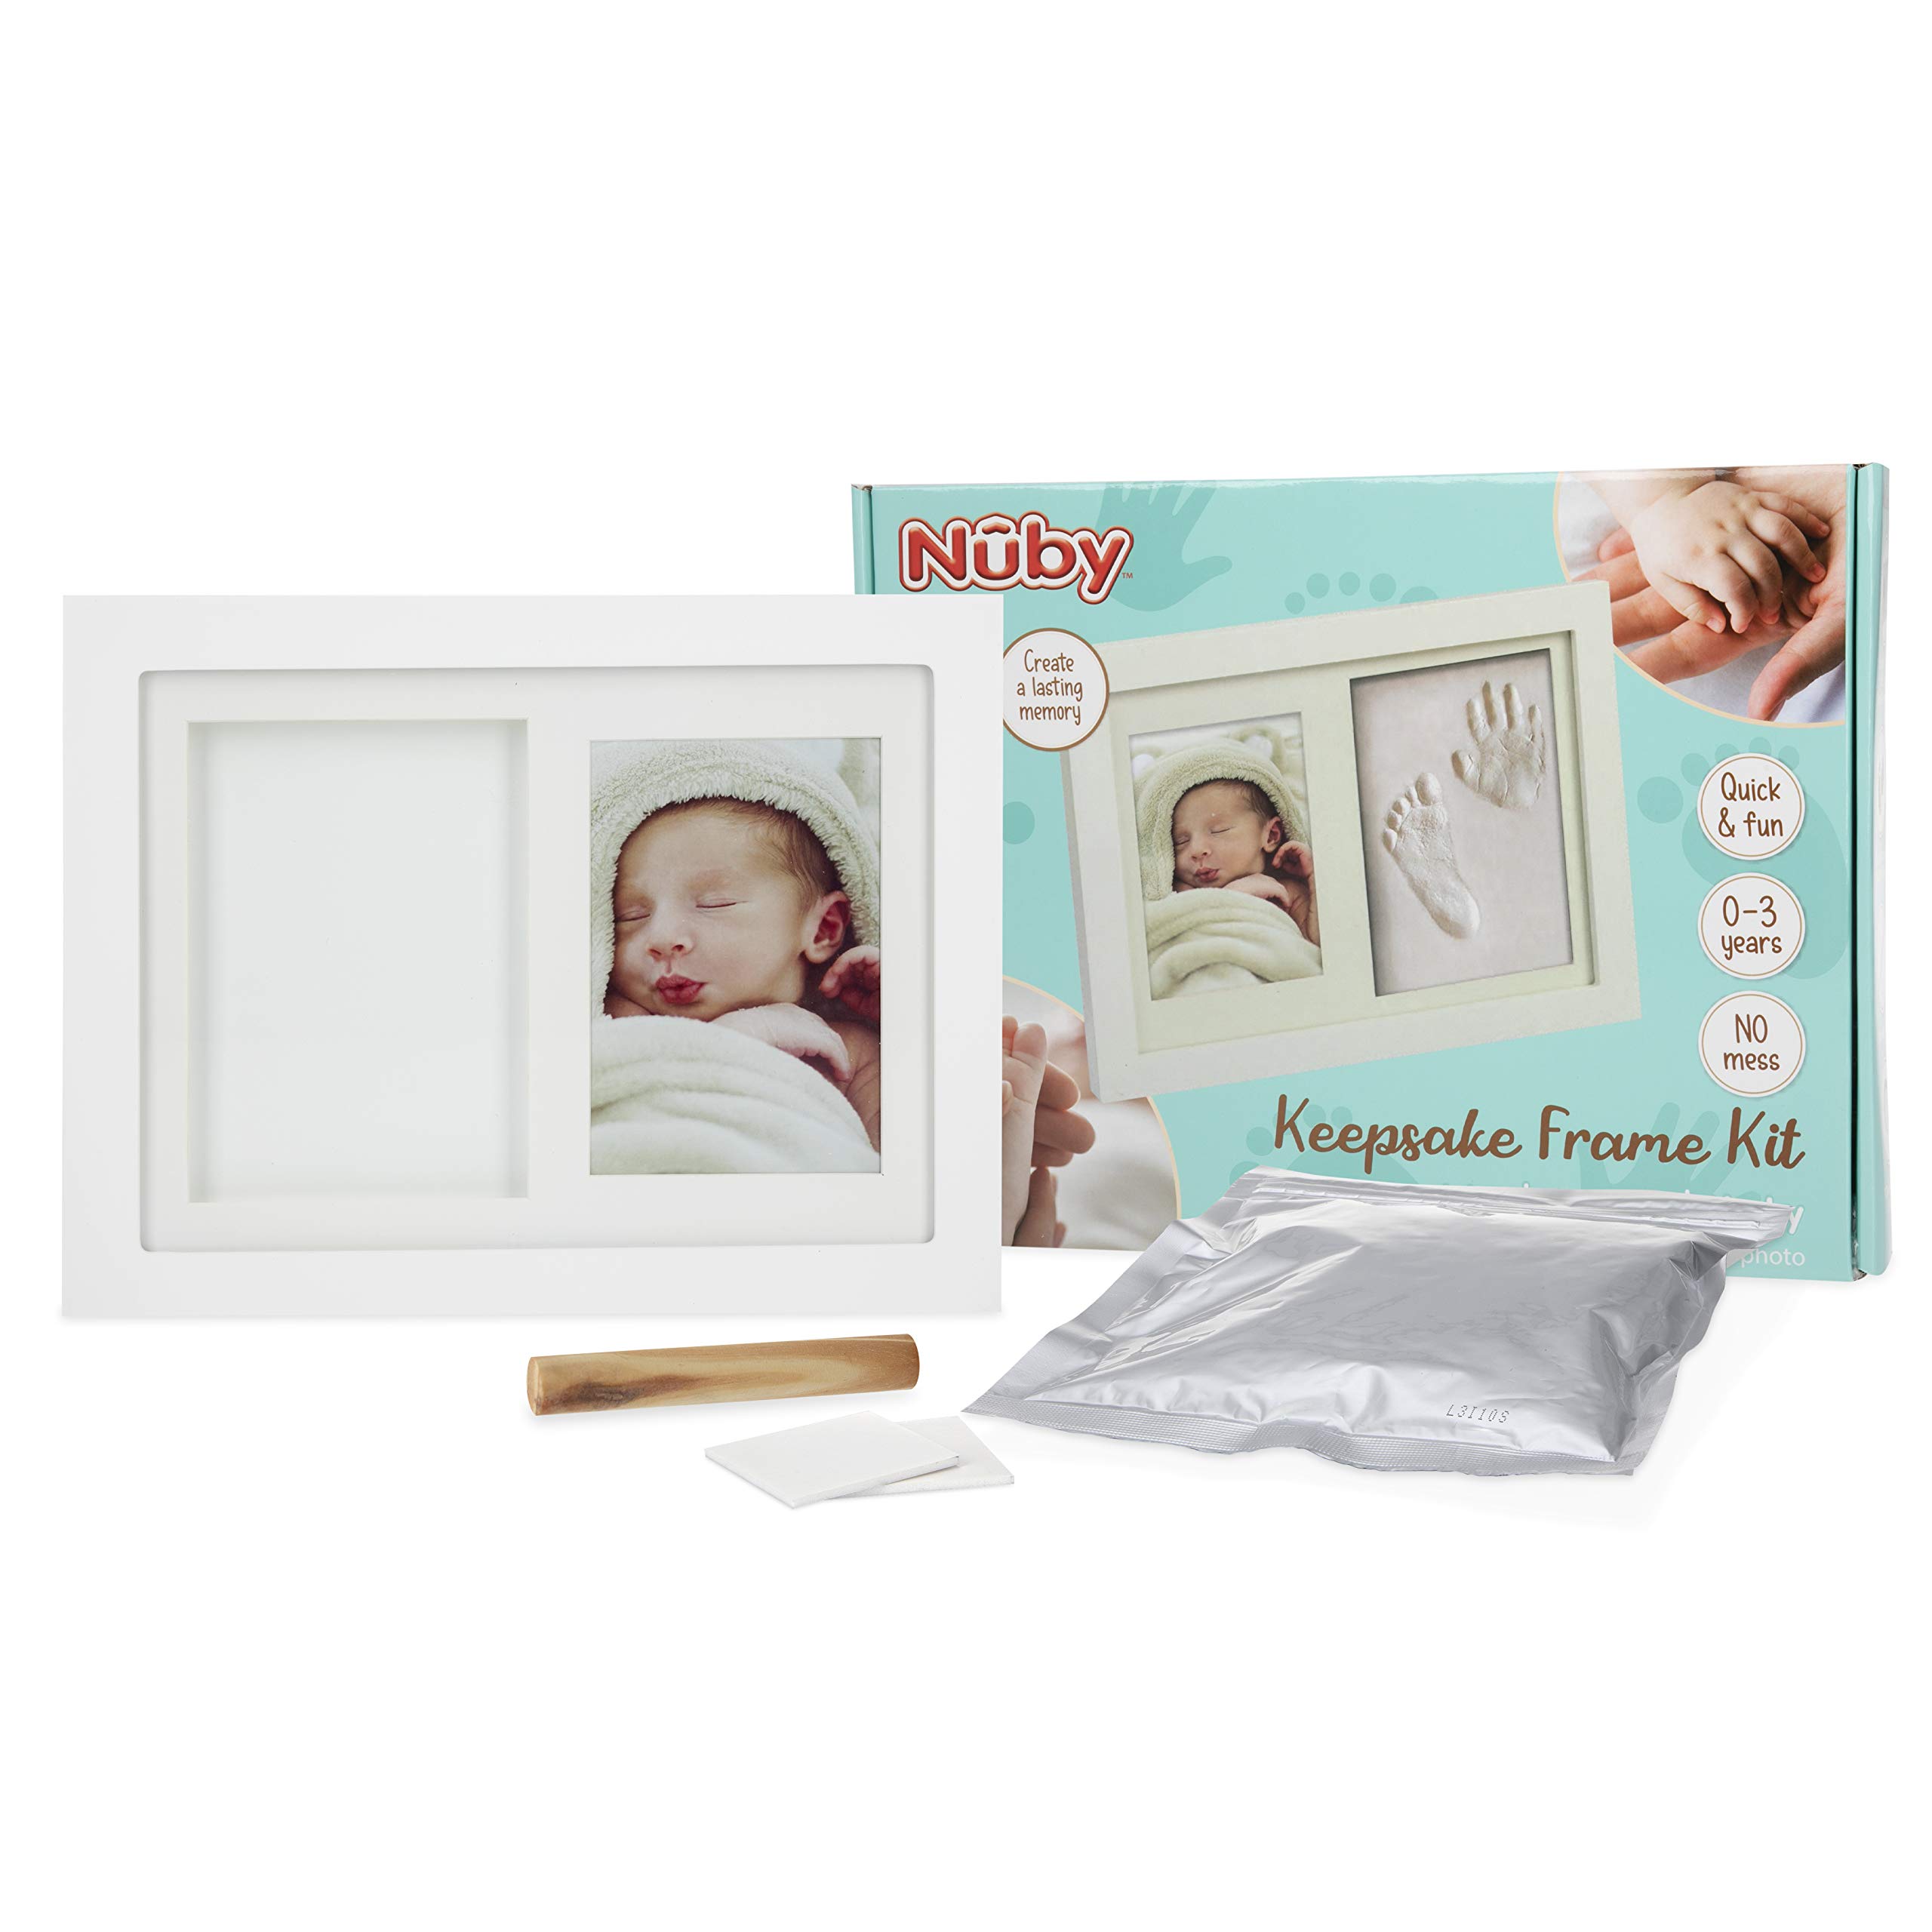 Nuby Baby Keepsake Classic White Wooden Wall Decor Frame That Holds One 3.5 x 5" Photo & 1 Clay Print Kit for Newborn Girls & Boys, Personalized Baby Gift